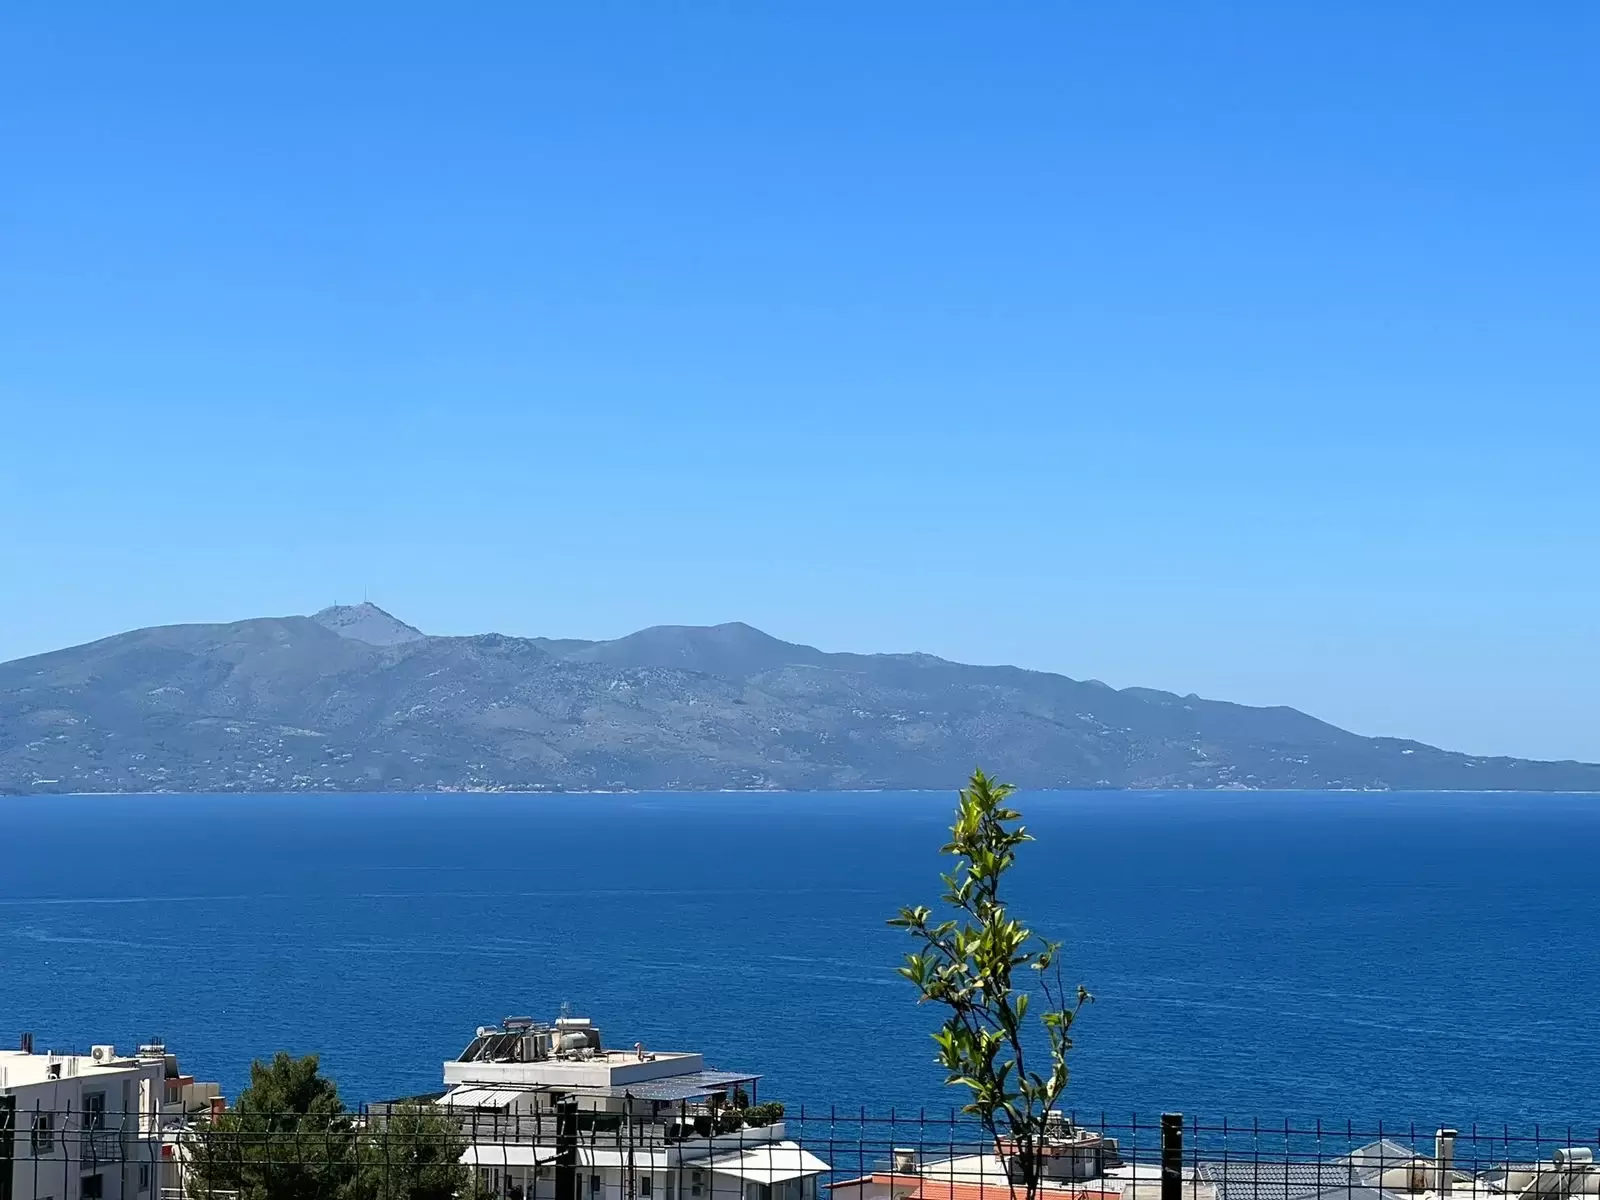 Apartment 2+1 For Sale In Saranda With Sea View